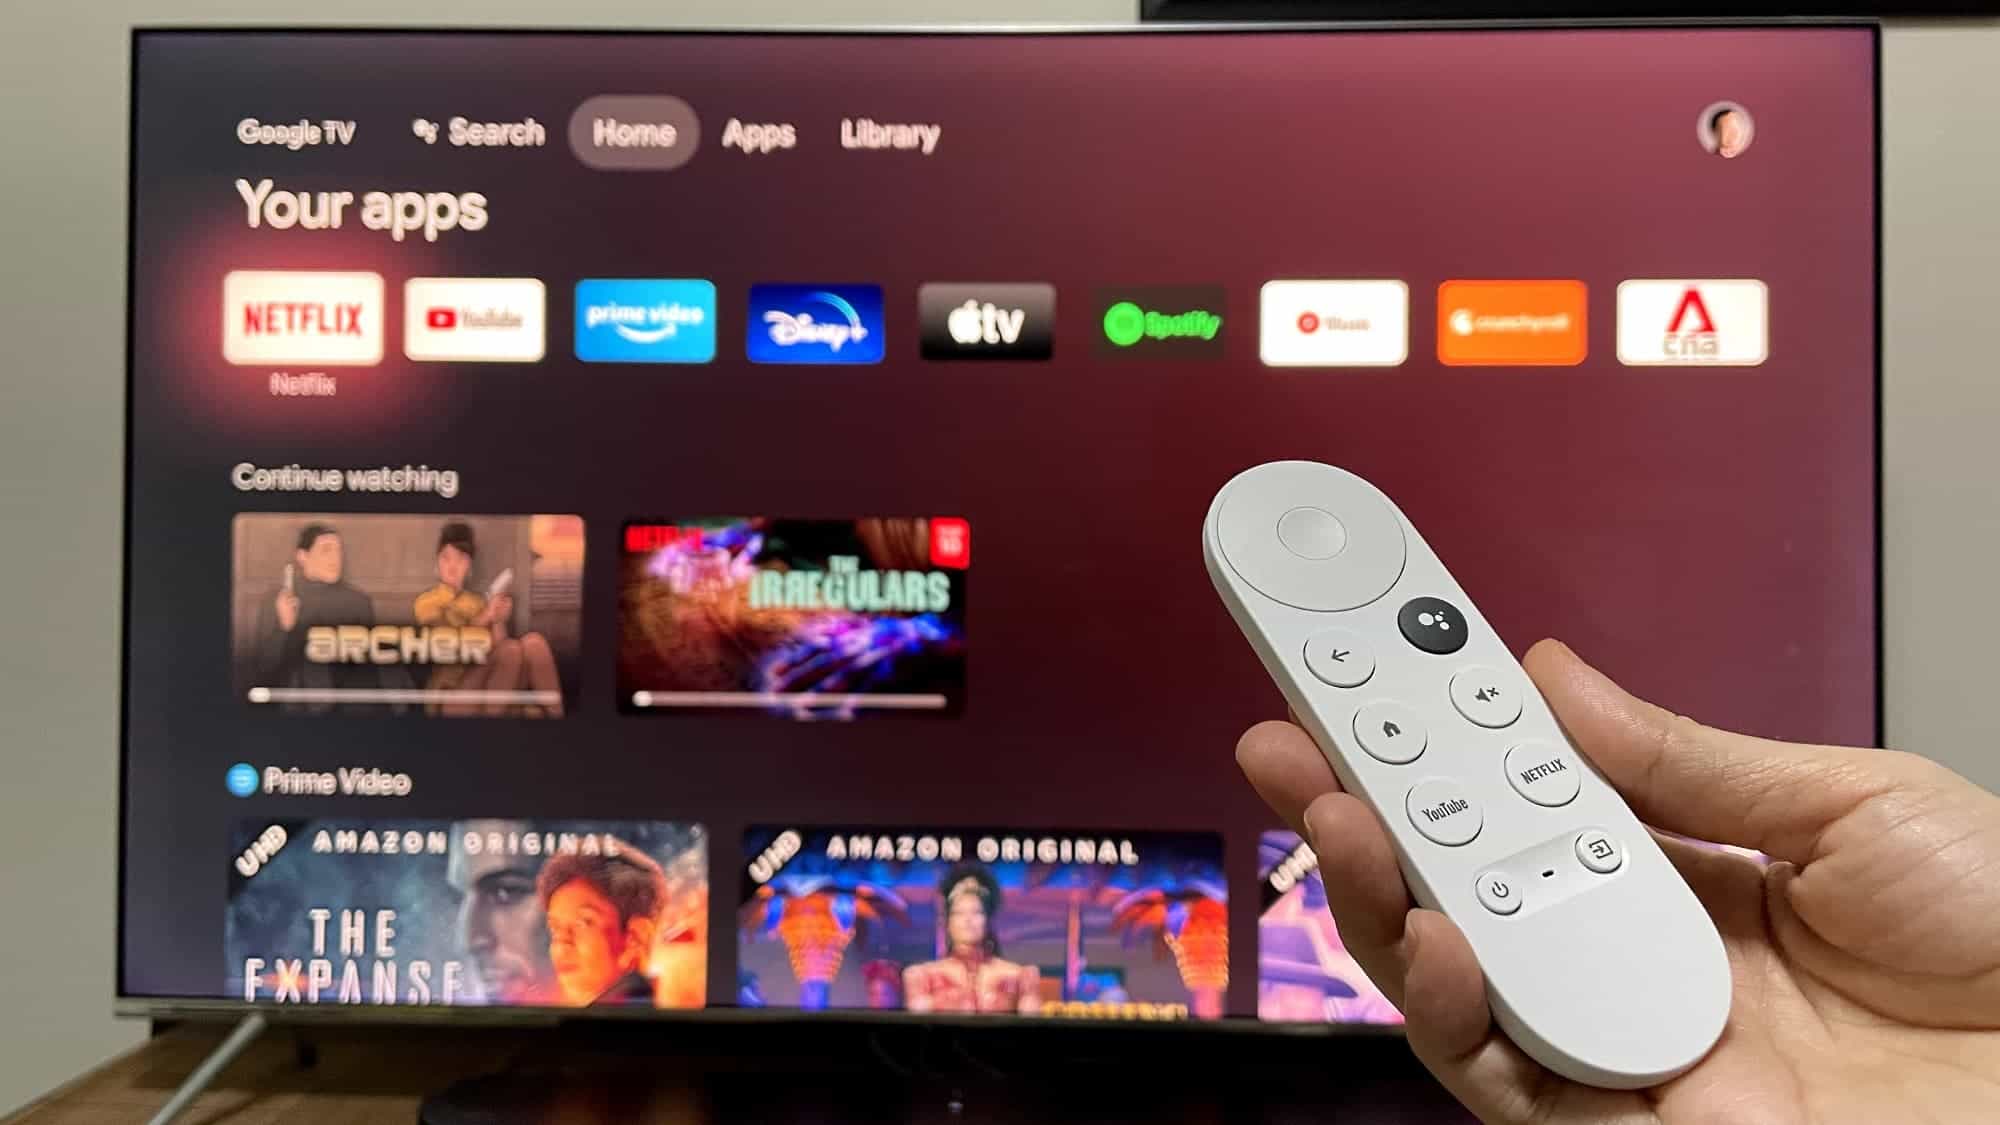 Panasonic starts transitioning from Android TV to Google TV this year -  FlatpanelsHD